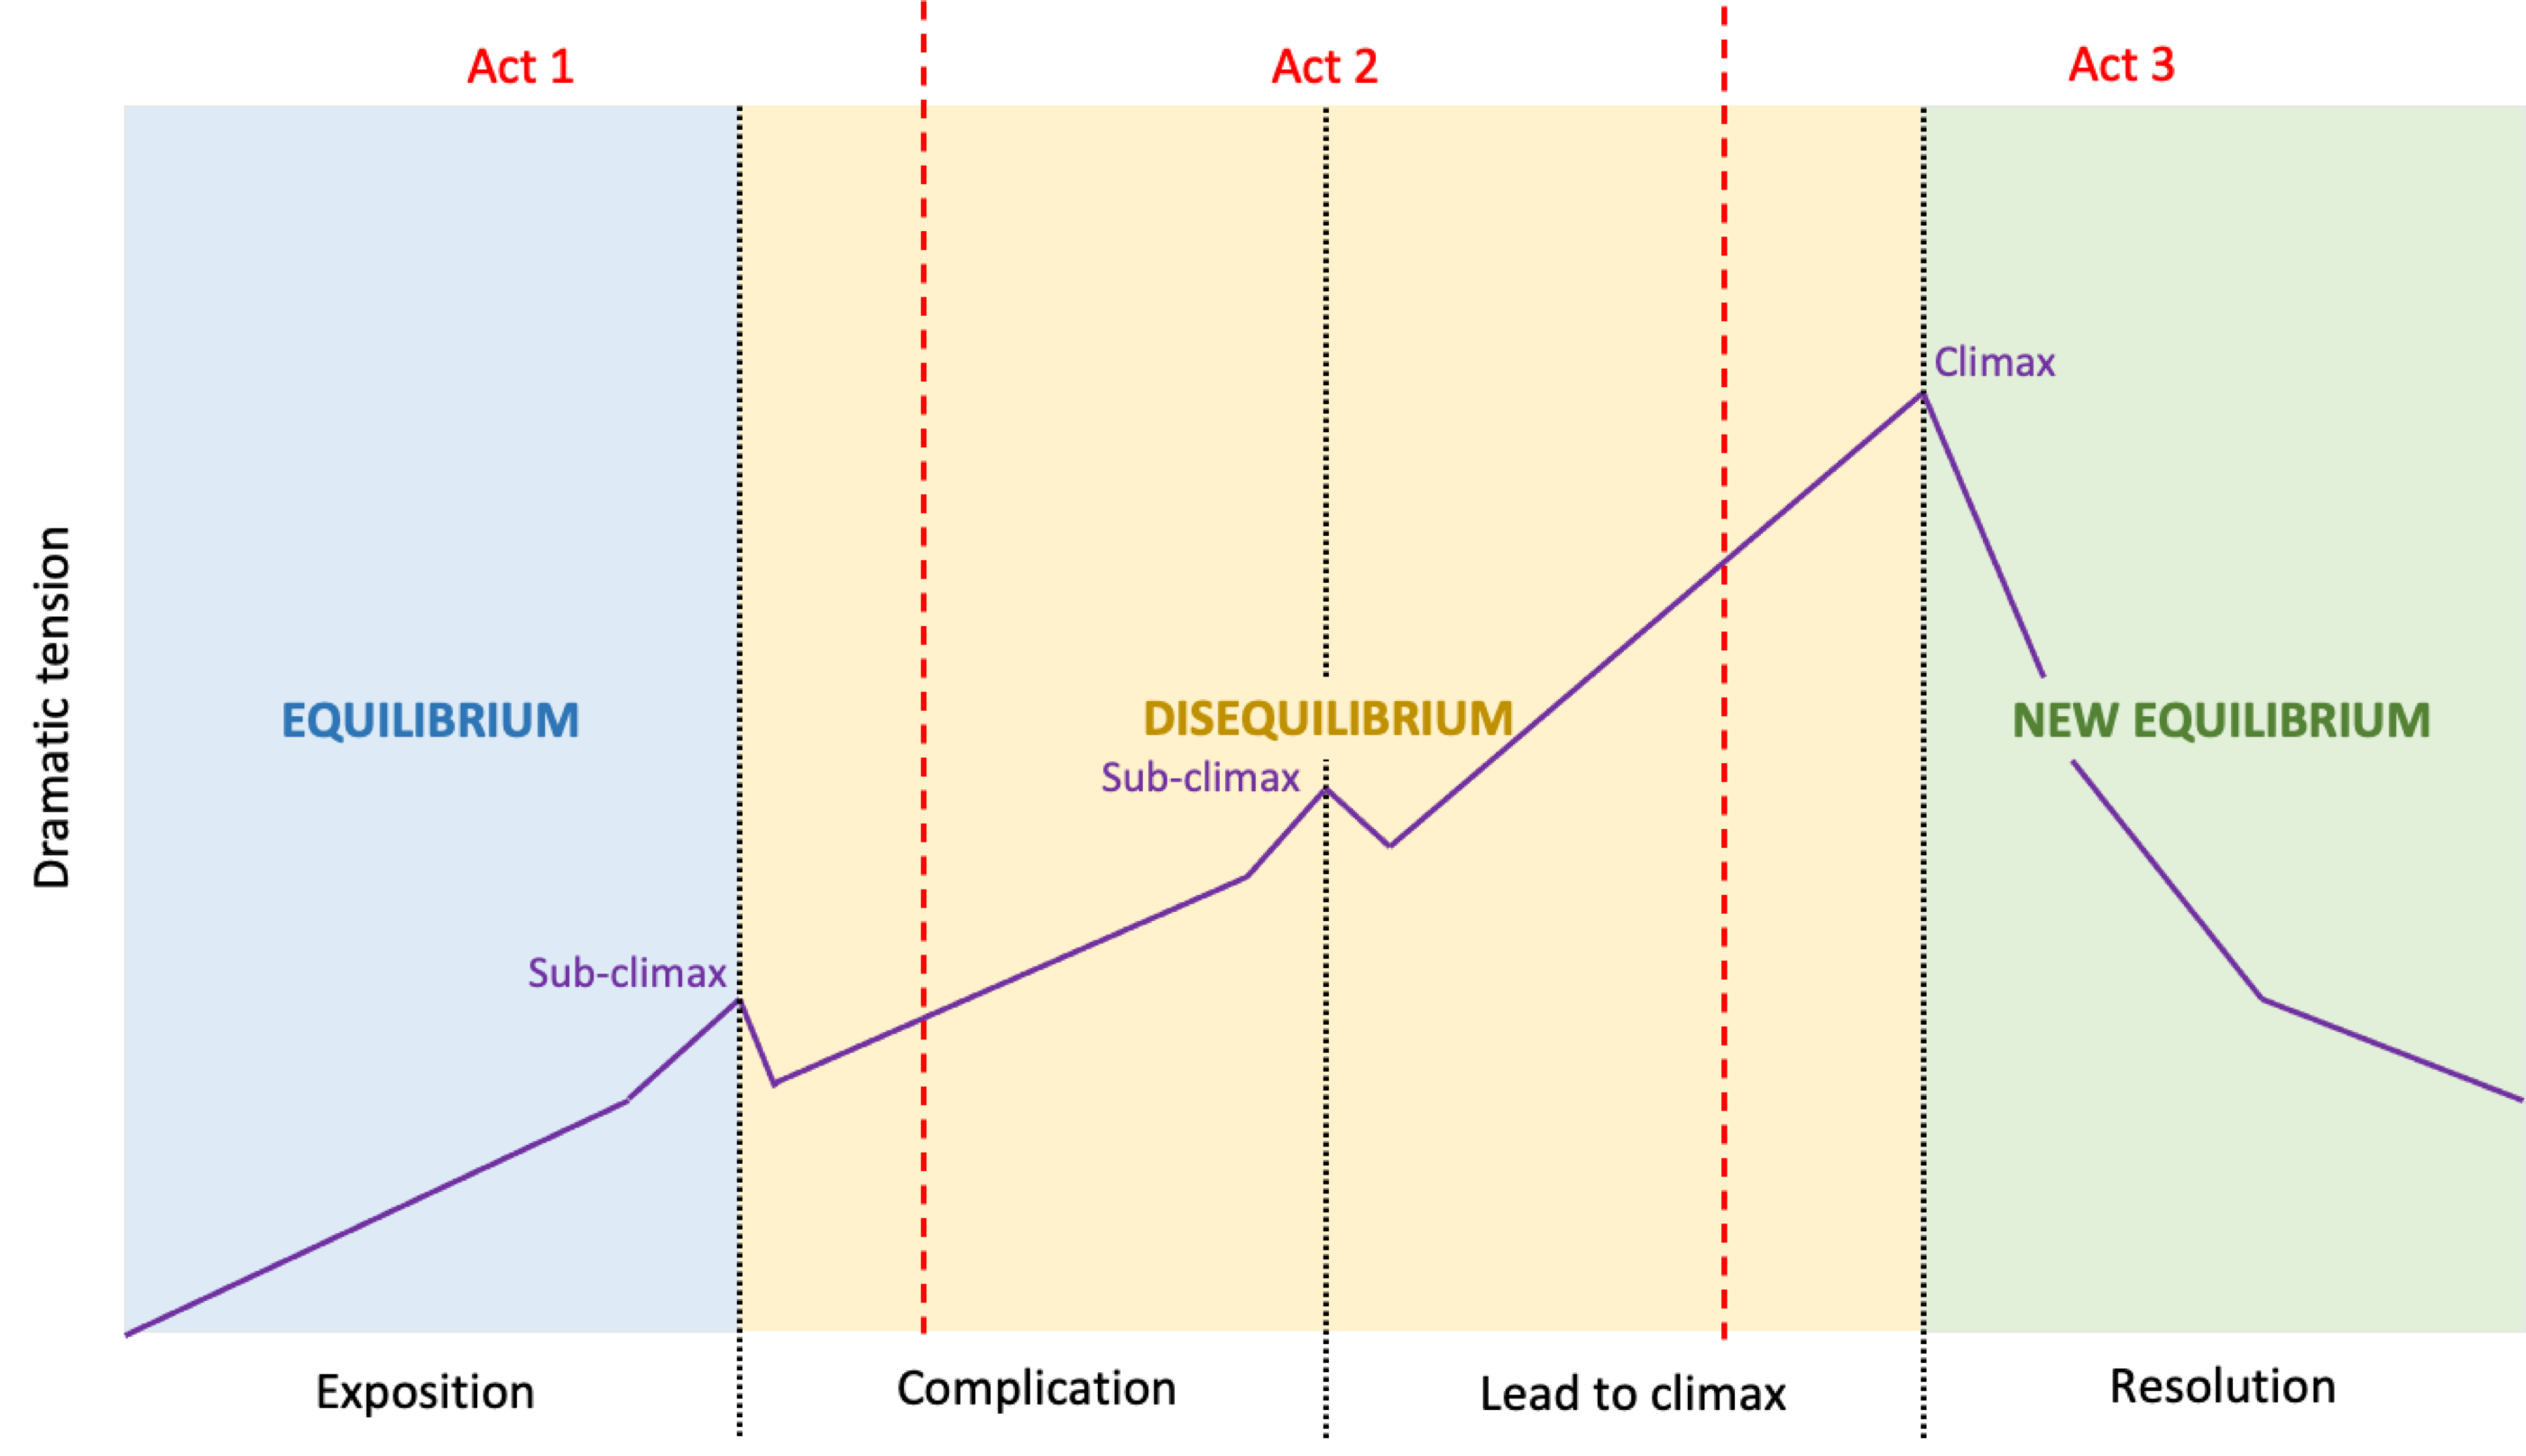 a diagram depicting the narrative arc across three acts. The rising dramatic tension is shown by a purple line. Two sub-climaxes are shown, as is the climax. The time before the first sub-climax is labelled exposition and considered to be a time of equilibrium. The time between the first sub-climax and the climax is a time of disequilibrium. The time between the first and second sub-climax is labelled complication, and the time between the second sub-climax and climax is labelled lead to climax. The time after the climax is labelled resolution and is considered a time of new equilibrium.